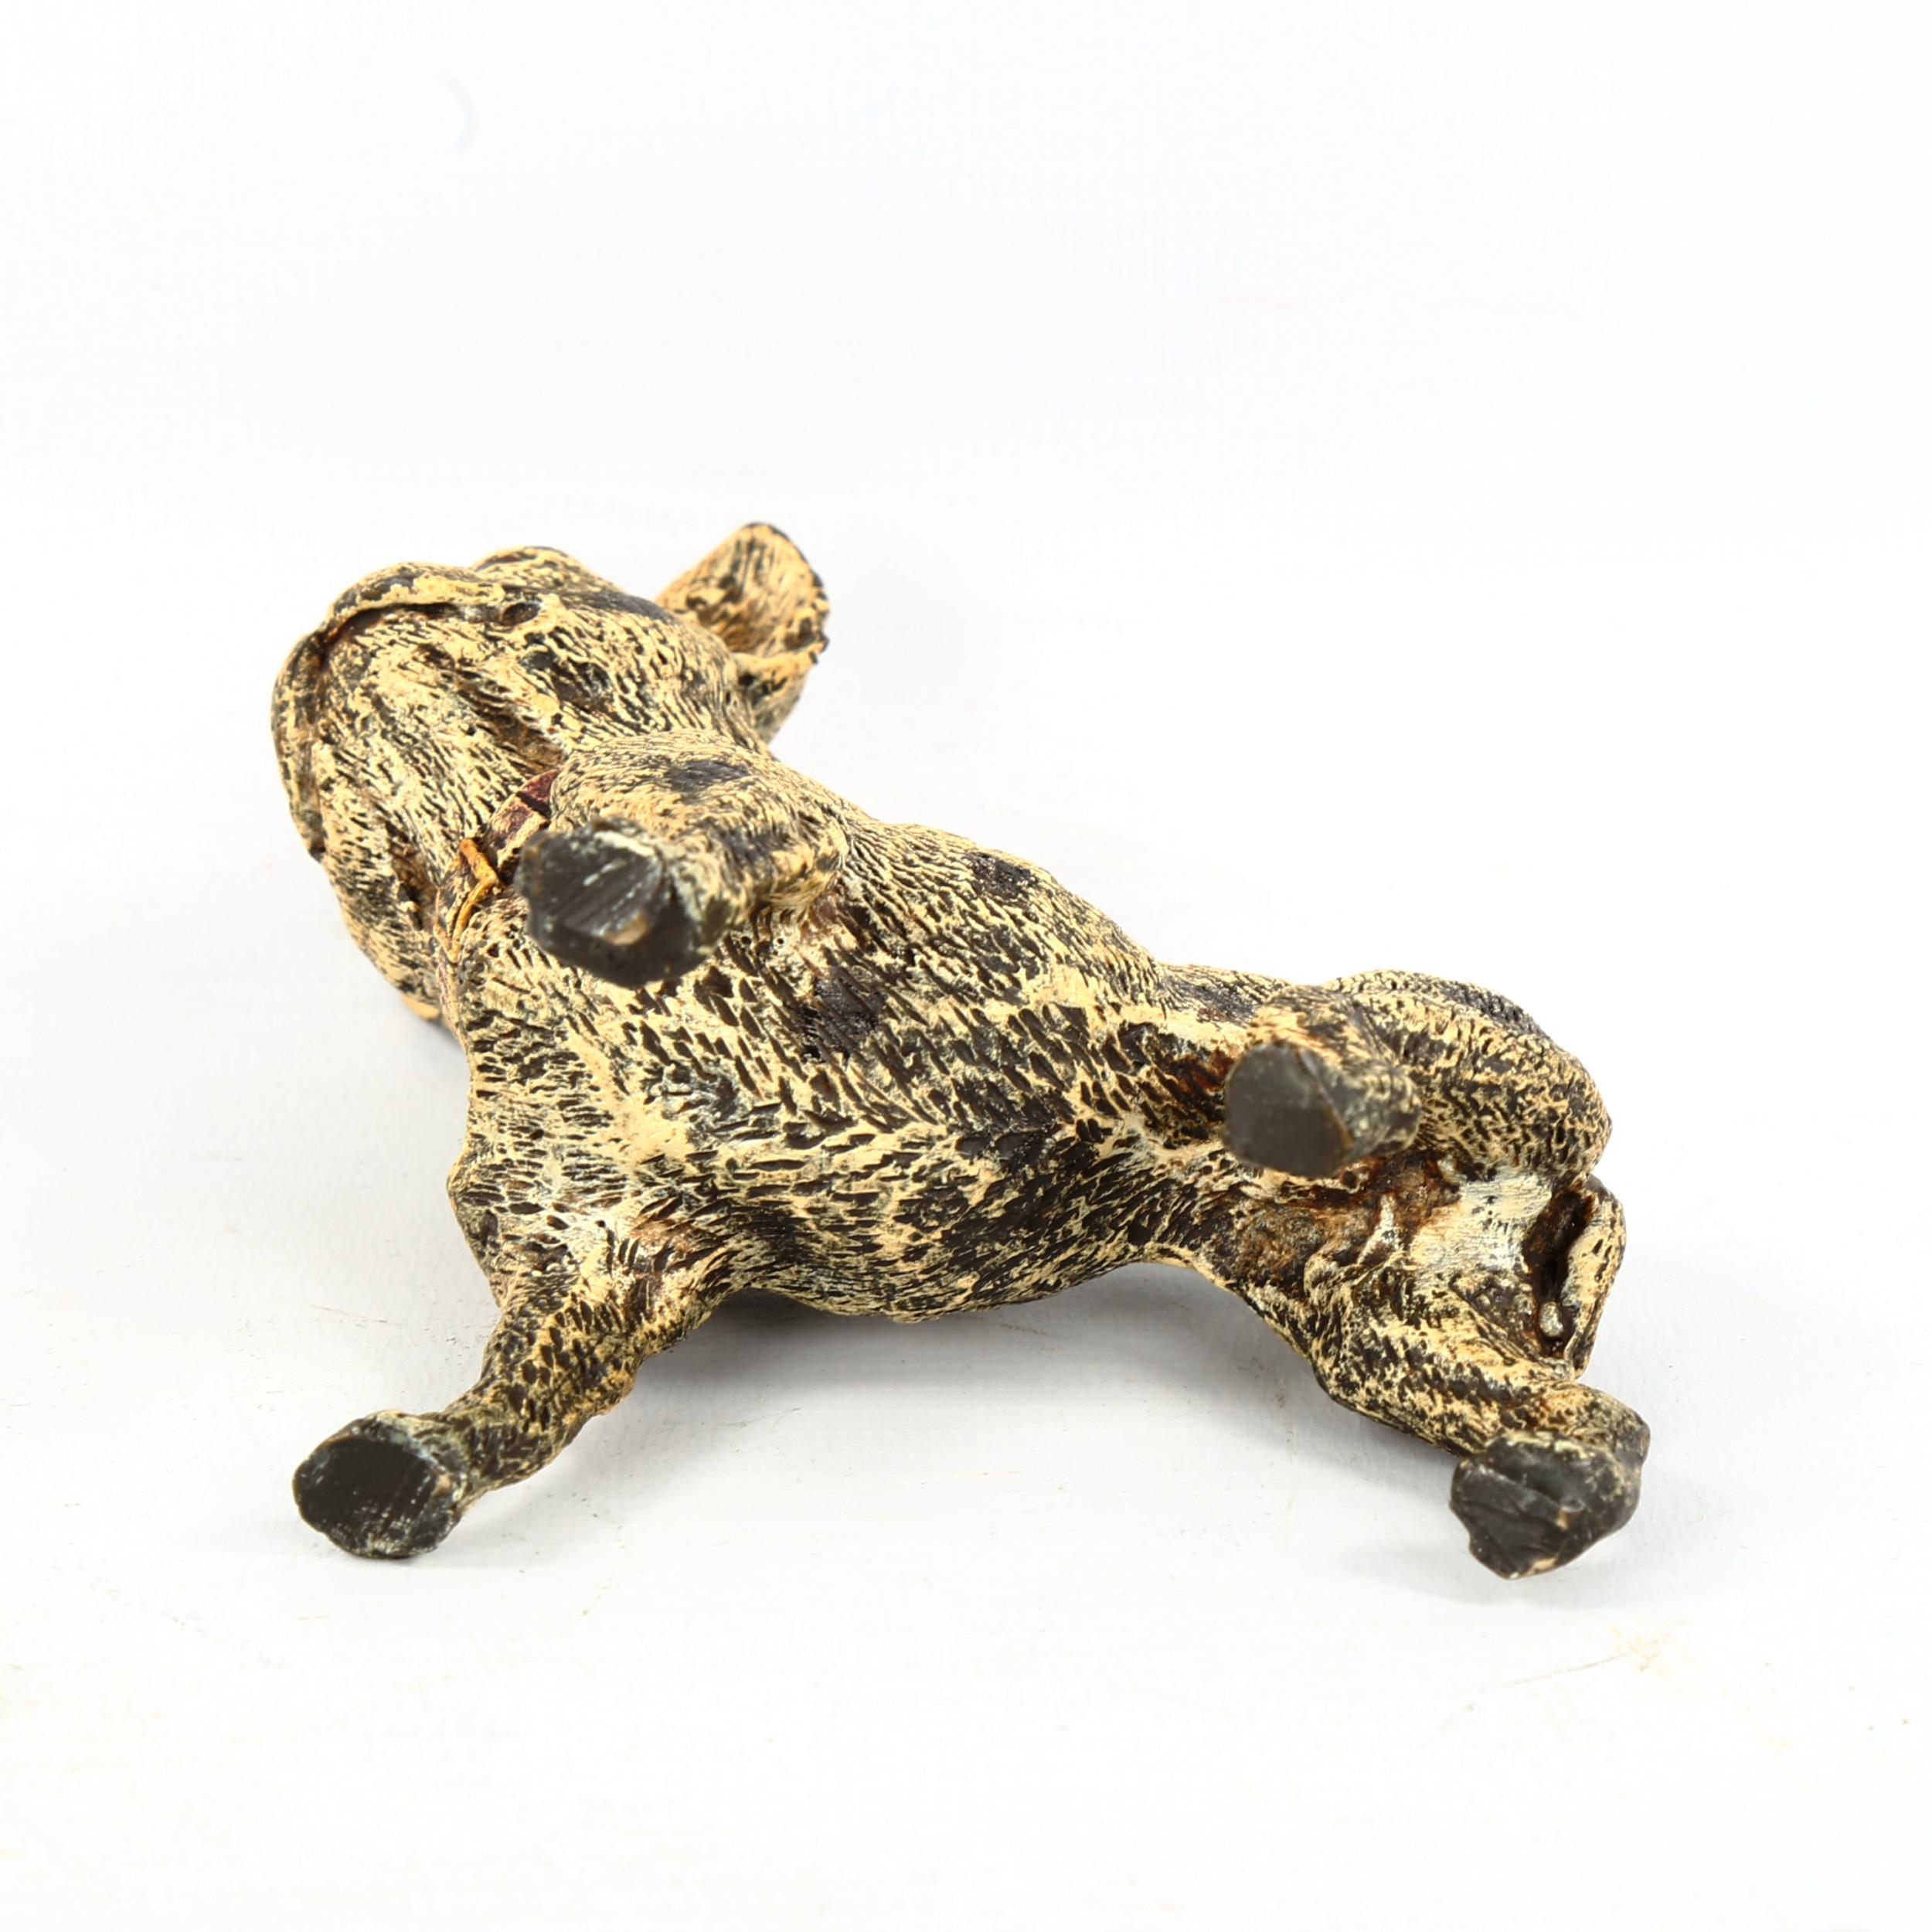 Austrian cold painted bronze French Bulldog, length 9cm - Image 3 of 3